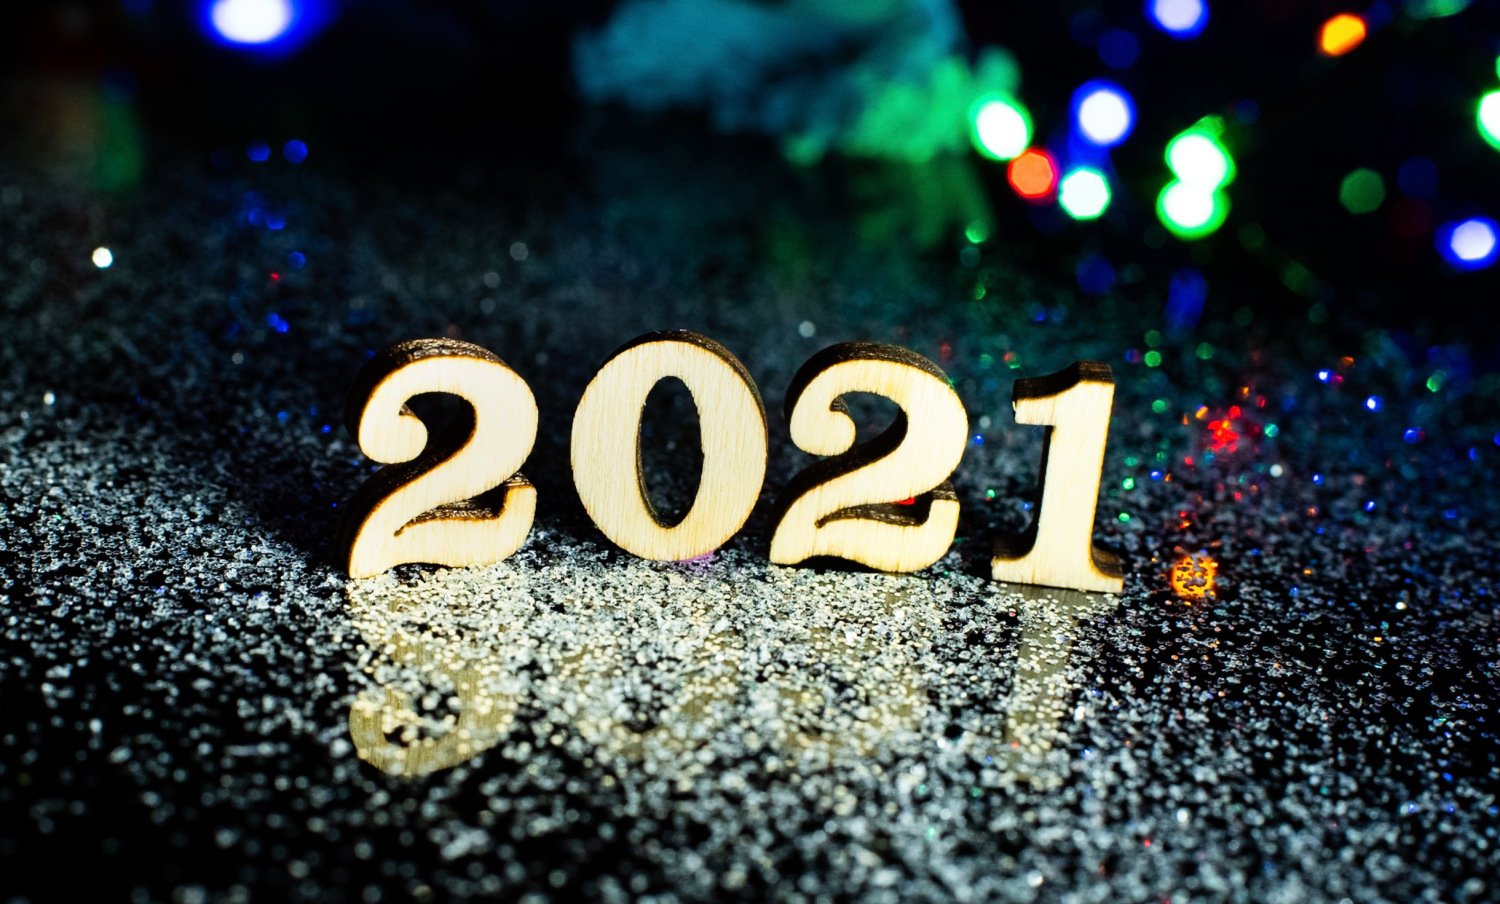 It’s
2021! A New Year! Some people use the new year as a chance to reflect on the
past year. Here at Far North International, we wanted to take a stroll down
memory lane and take a look at this past year and our goals moving forward.In
2020, here are the milestones Far North International achieved:
Doubled
our website salesRemained
a COVID-free [...]